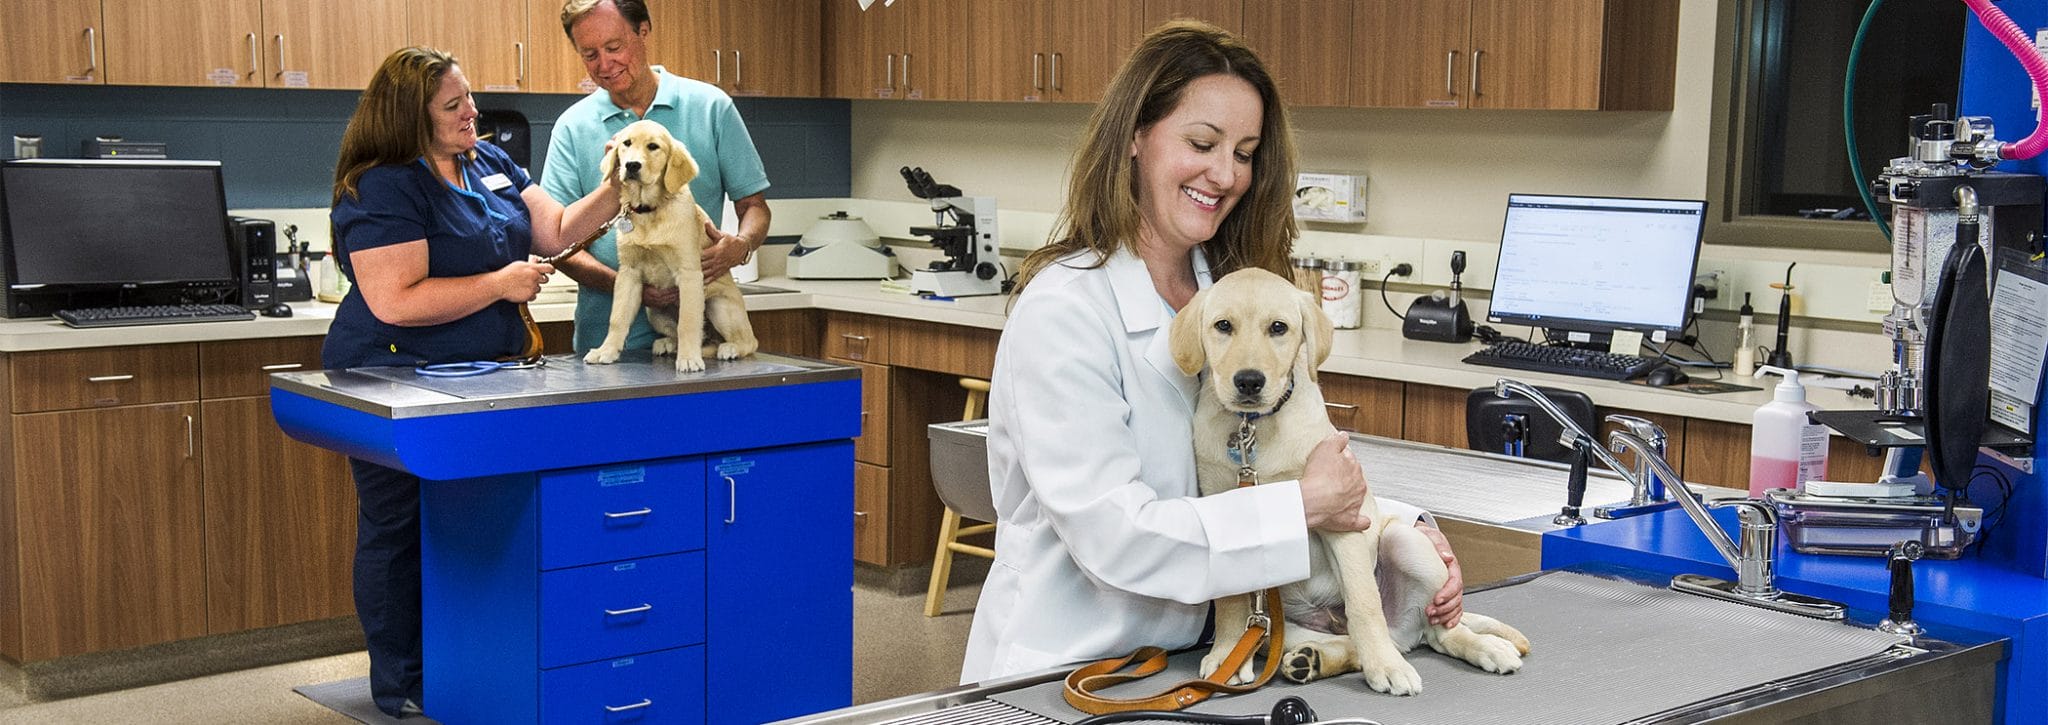 A woman in a white lab coat smiles while holding a yellow lab puppy on an examining table in our brightly lit vet clinic. Behind her, a man and a woman examine a golden retriever puppy at a different table